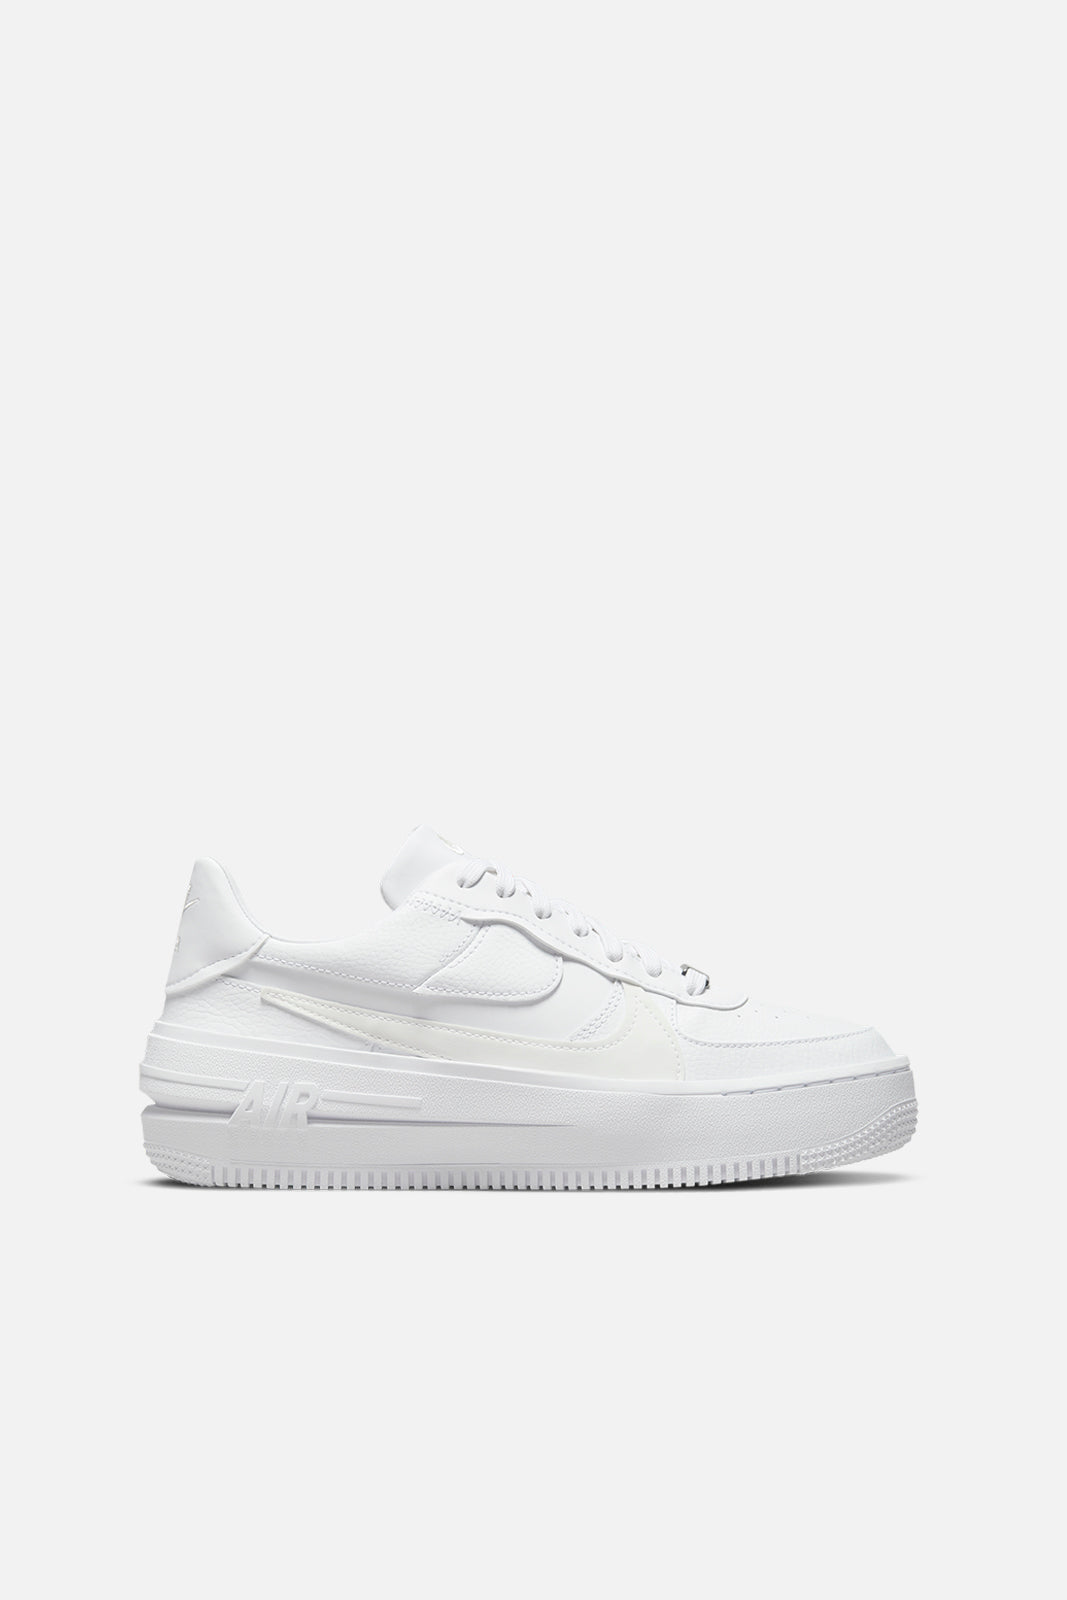 NIKE AIR FORCE 1 ONE LOW LX UK US 4 5 6 7 8 9 10 LUX WHITE INSIDE